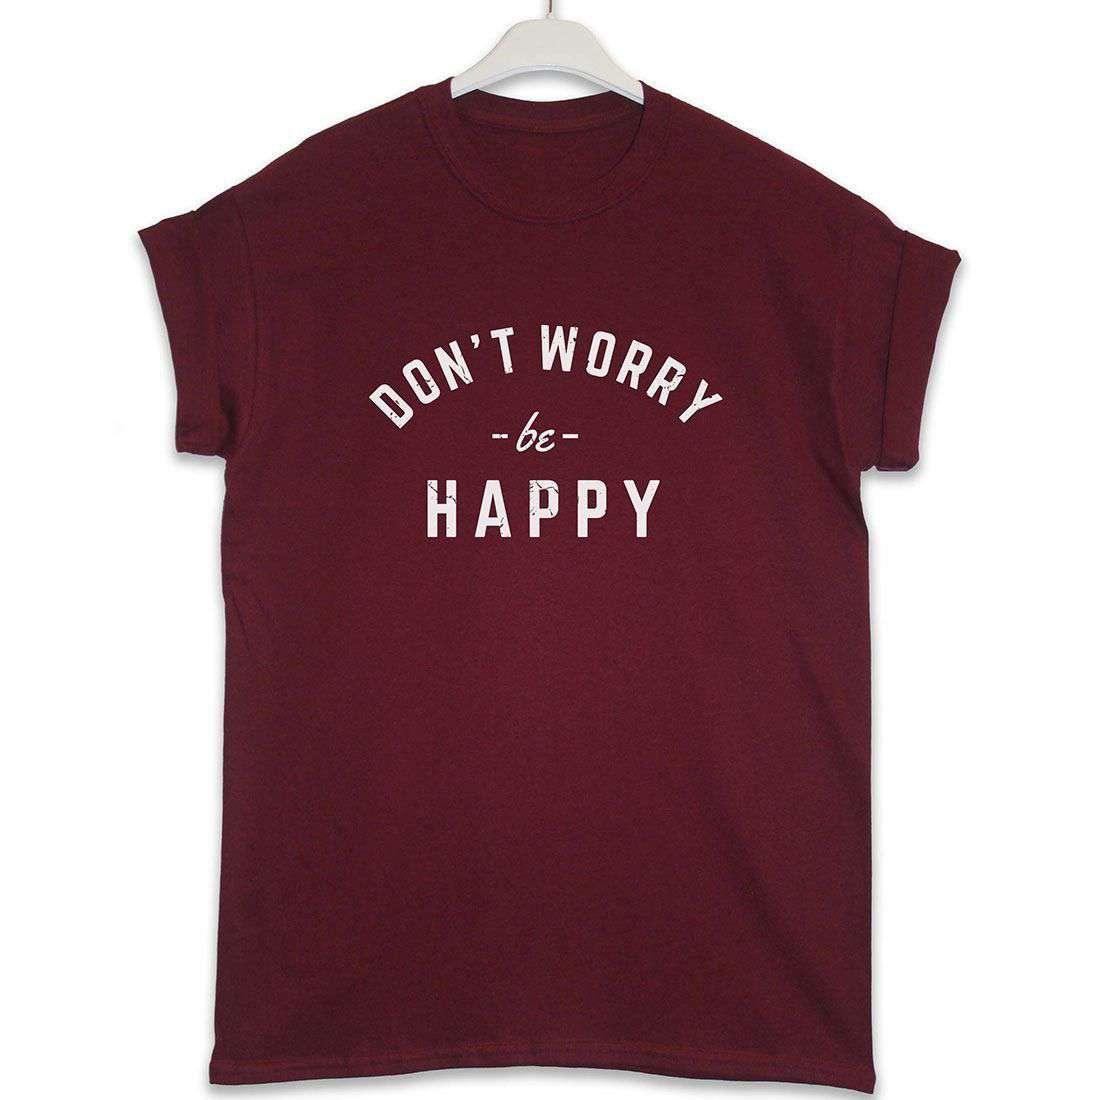 Don't Worry Be Happy T-Shirt For Men 8Ball